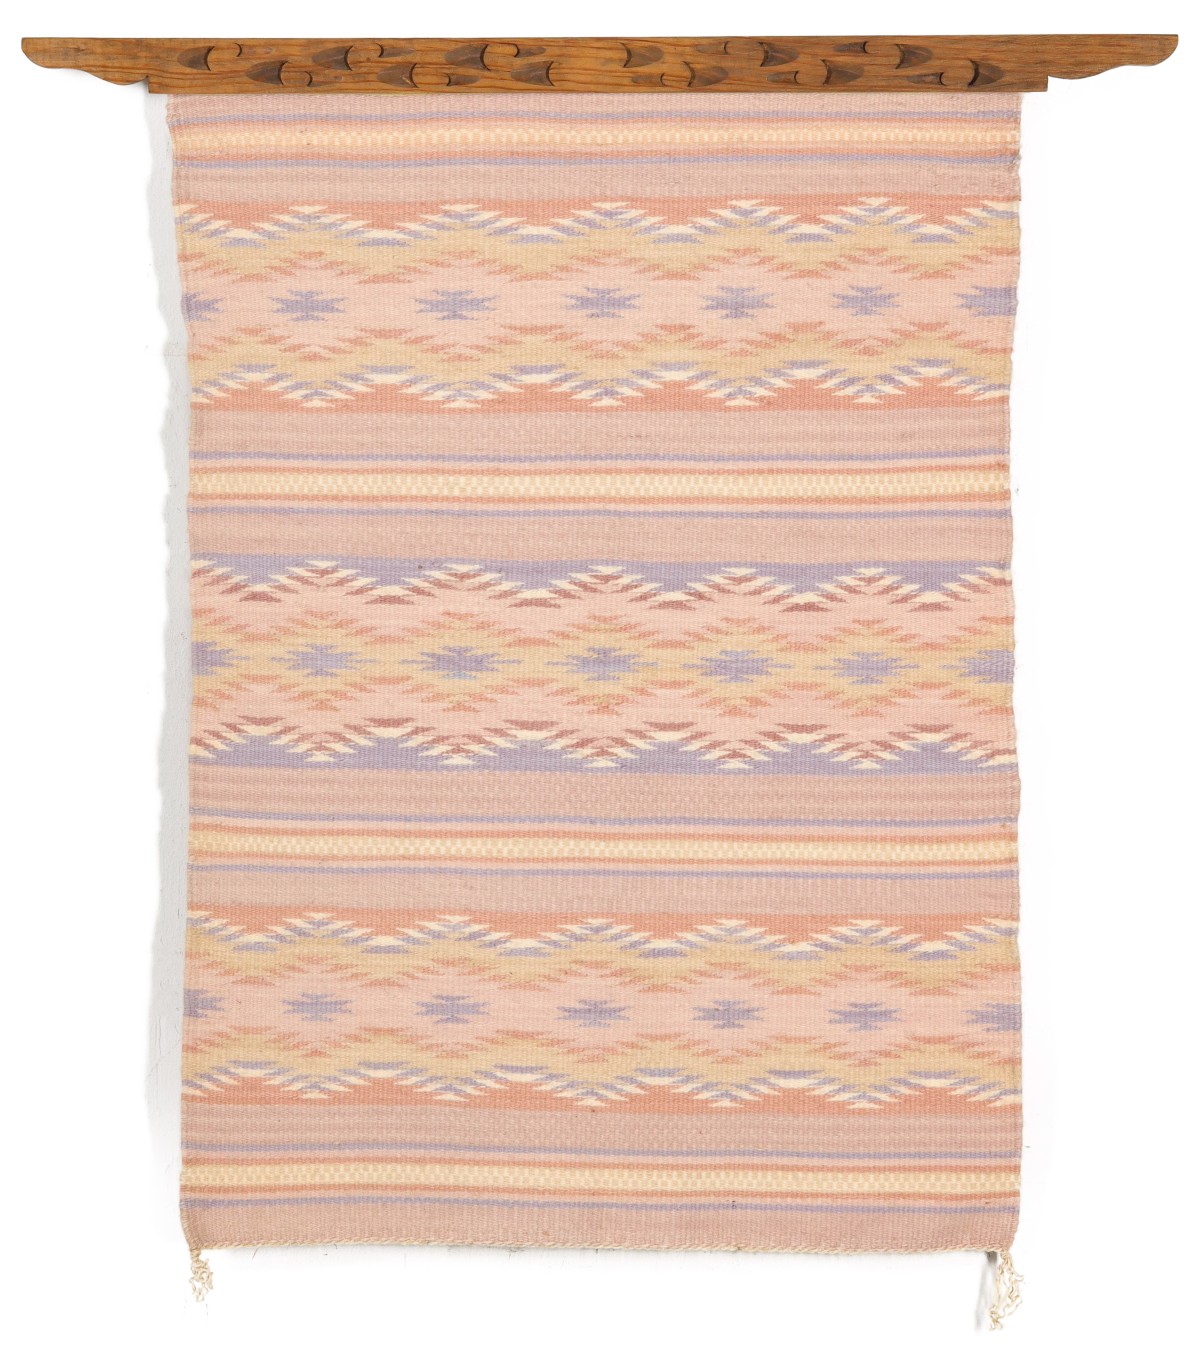 A LATE 20TH CENTURY NAVAJO WIDE RUINS WEAVING